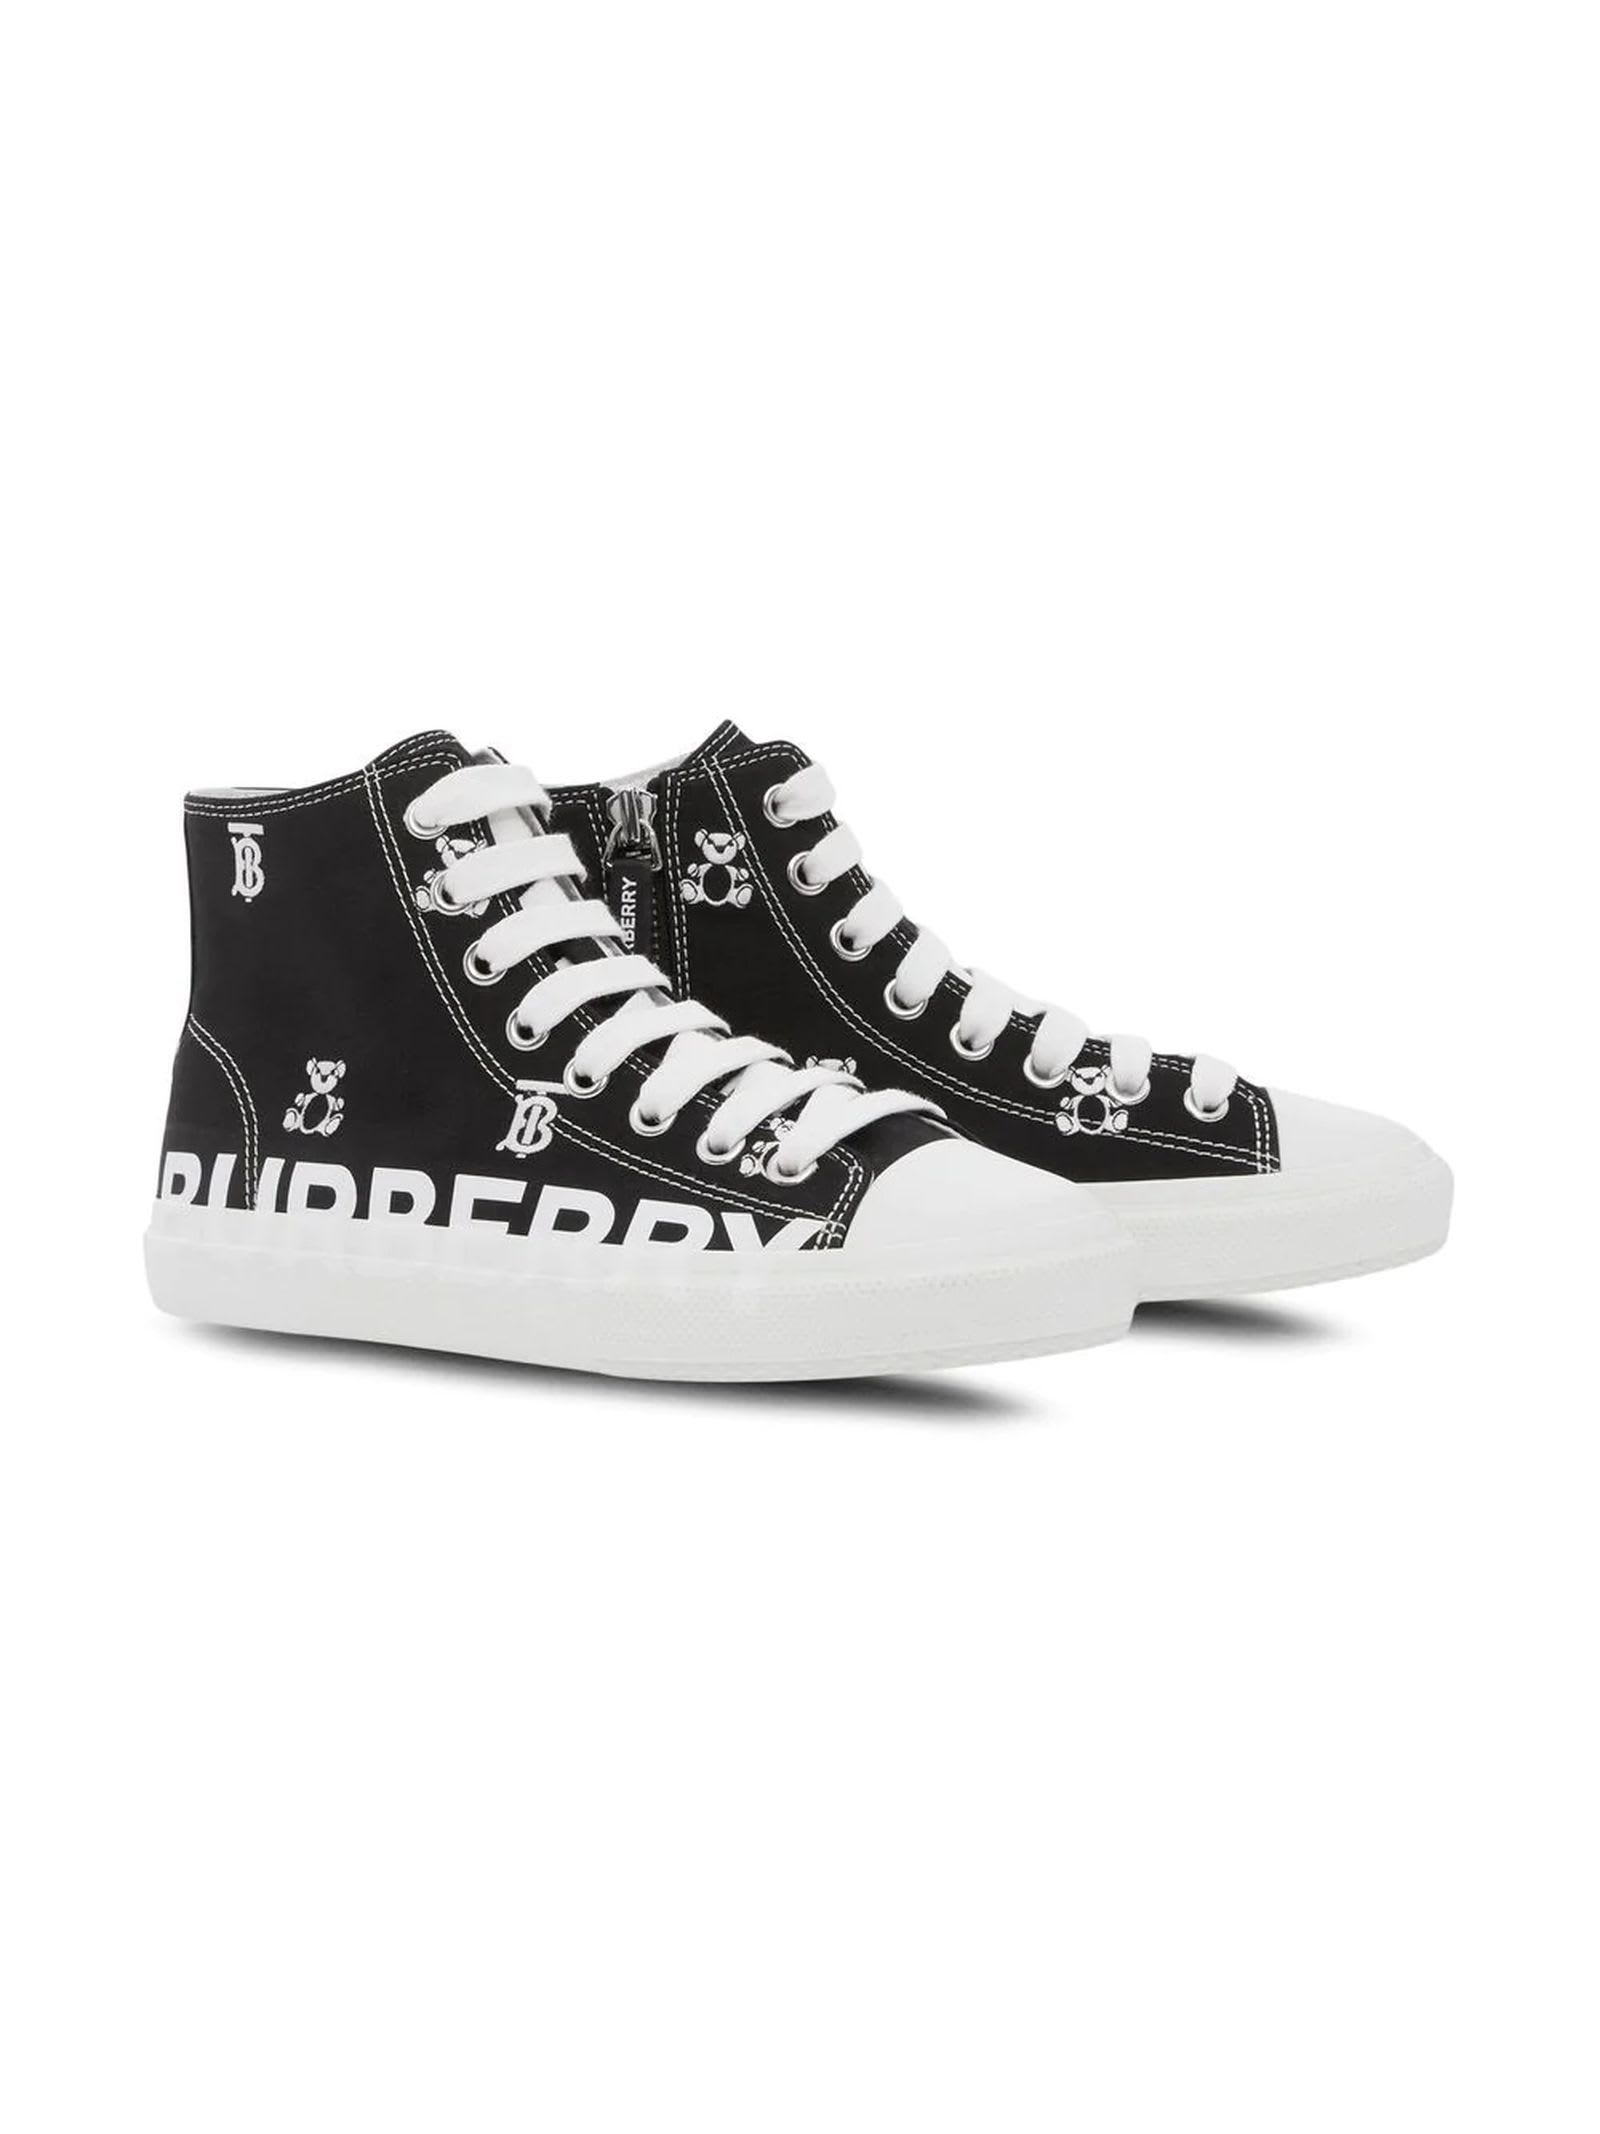 Burberry Black Fabric Sneakers